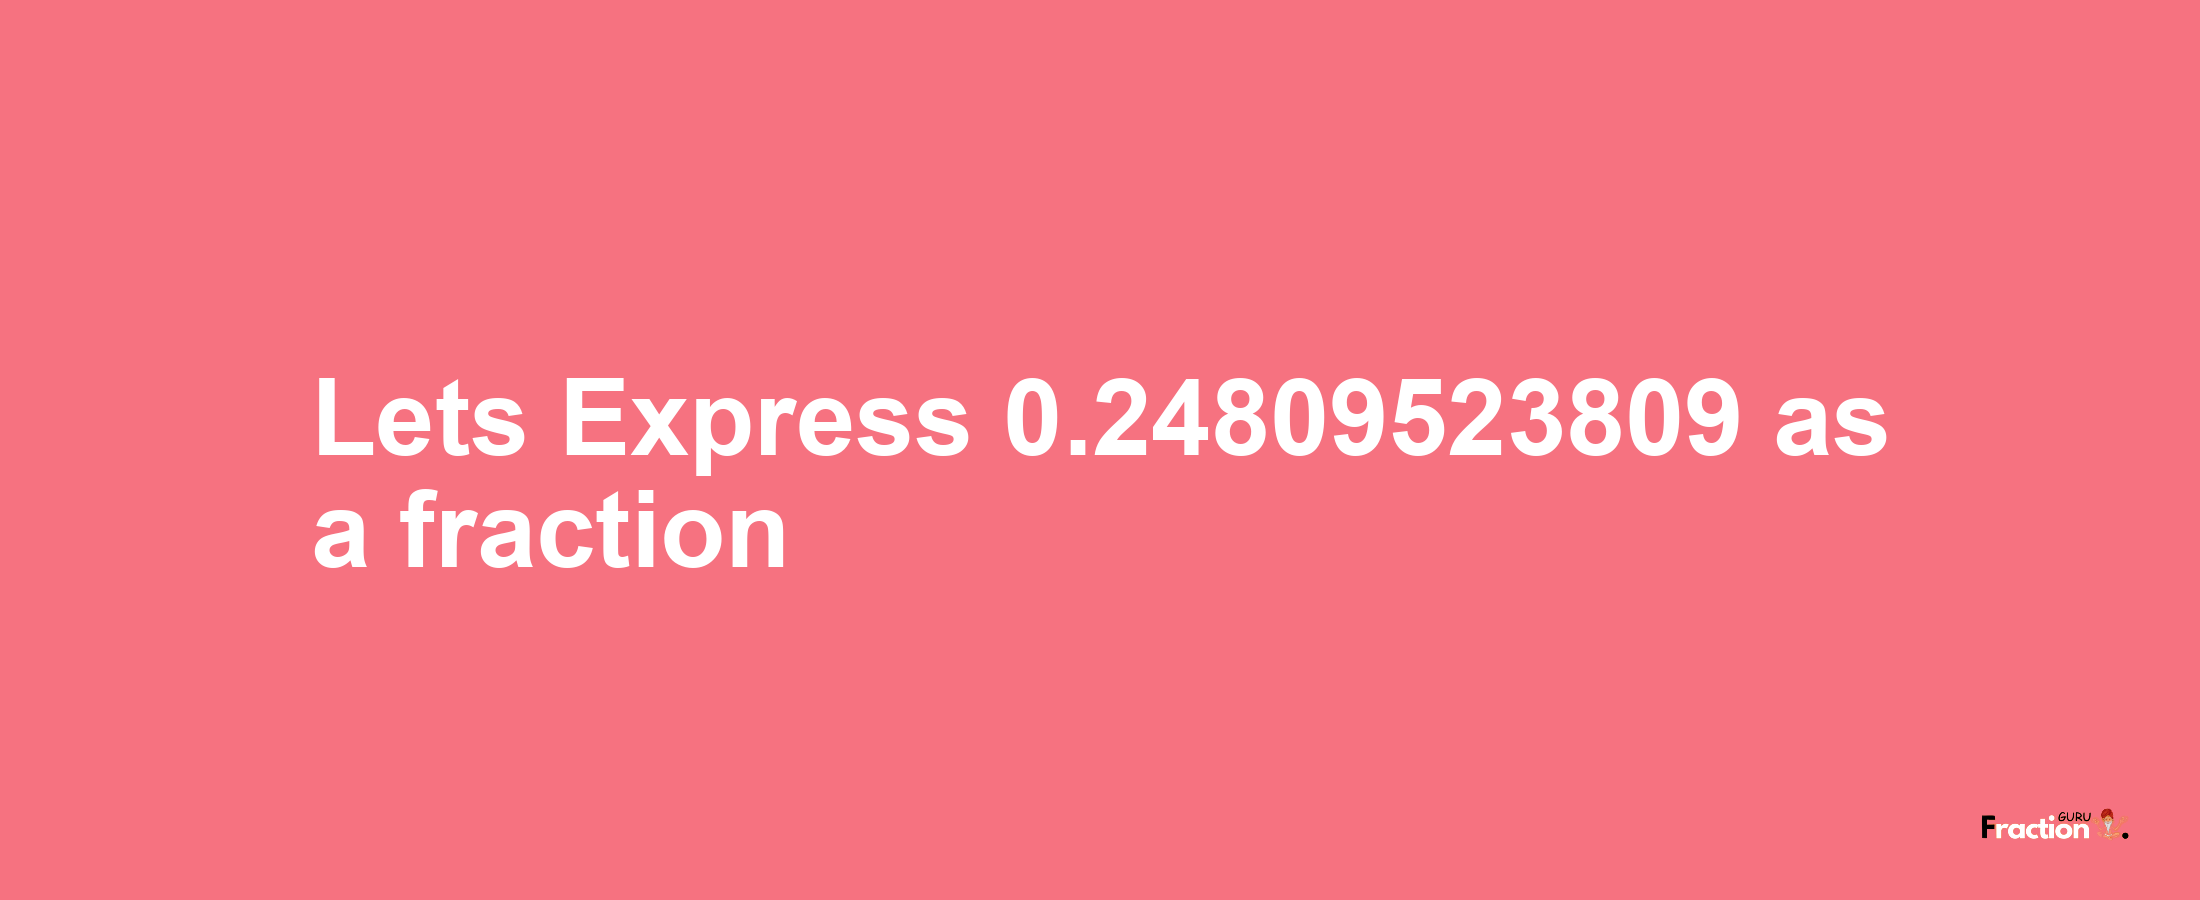 Lets Express 0.24809523809 as afraction